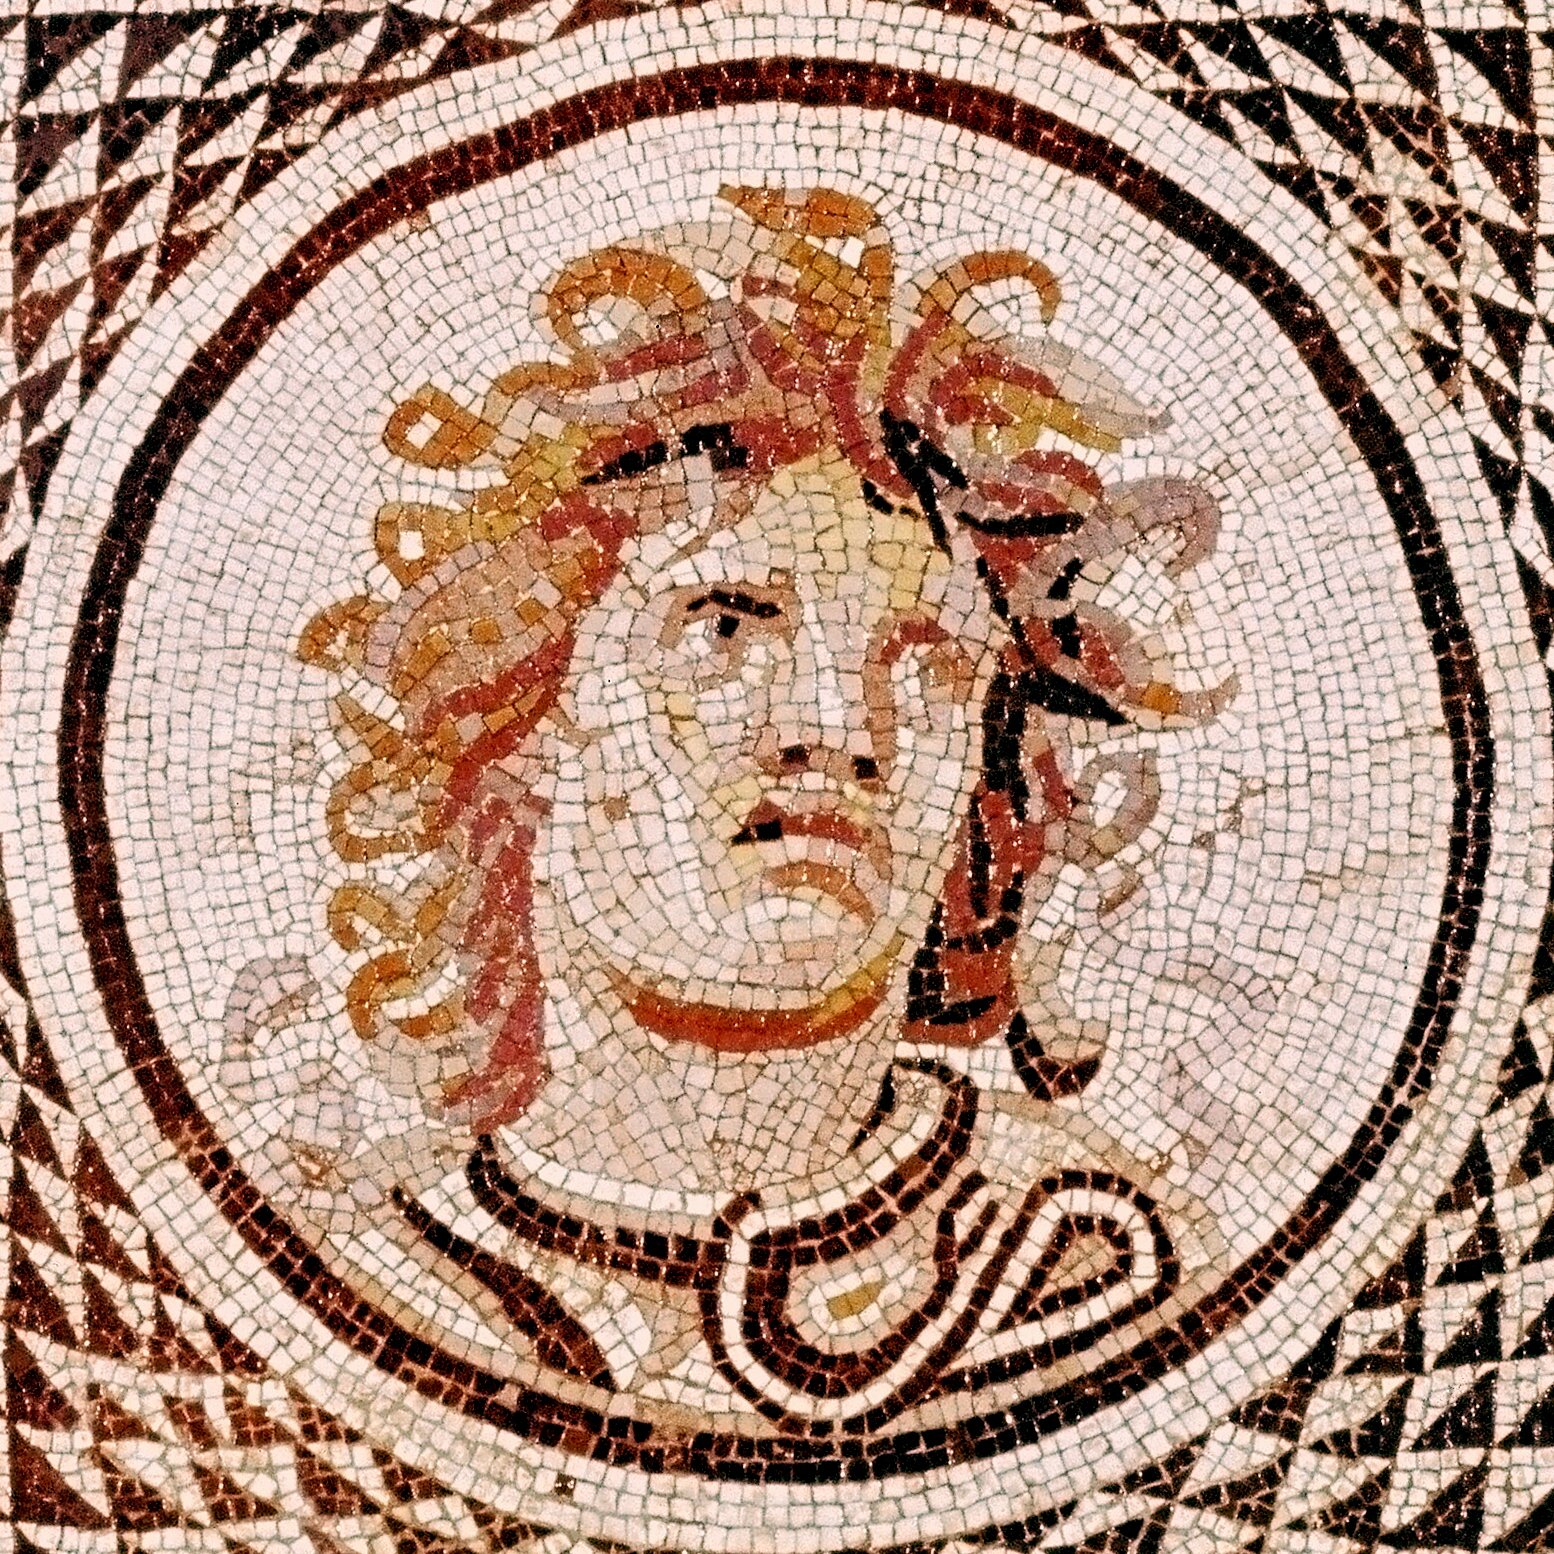 A Roman mosaic floor features a more human-like Medusa bust from the 100s A.D., with wild curls instead of snake locks, and traits resembling Alexander the Great. The mosaic positions Medusa within a shield of concentric circles, producing an optical illusion with alternating black and white triangles.